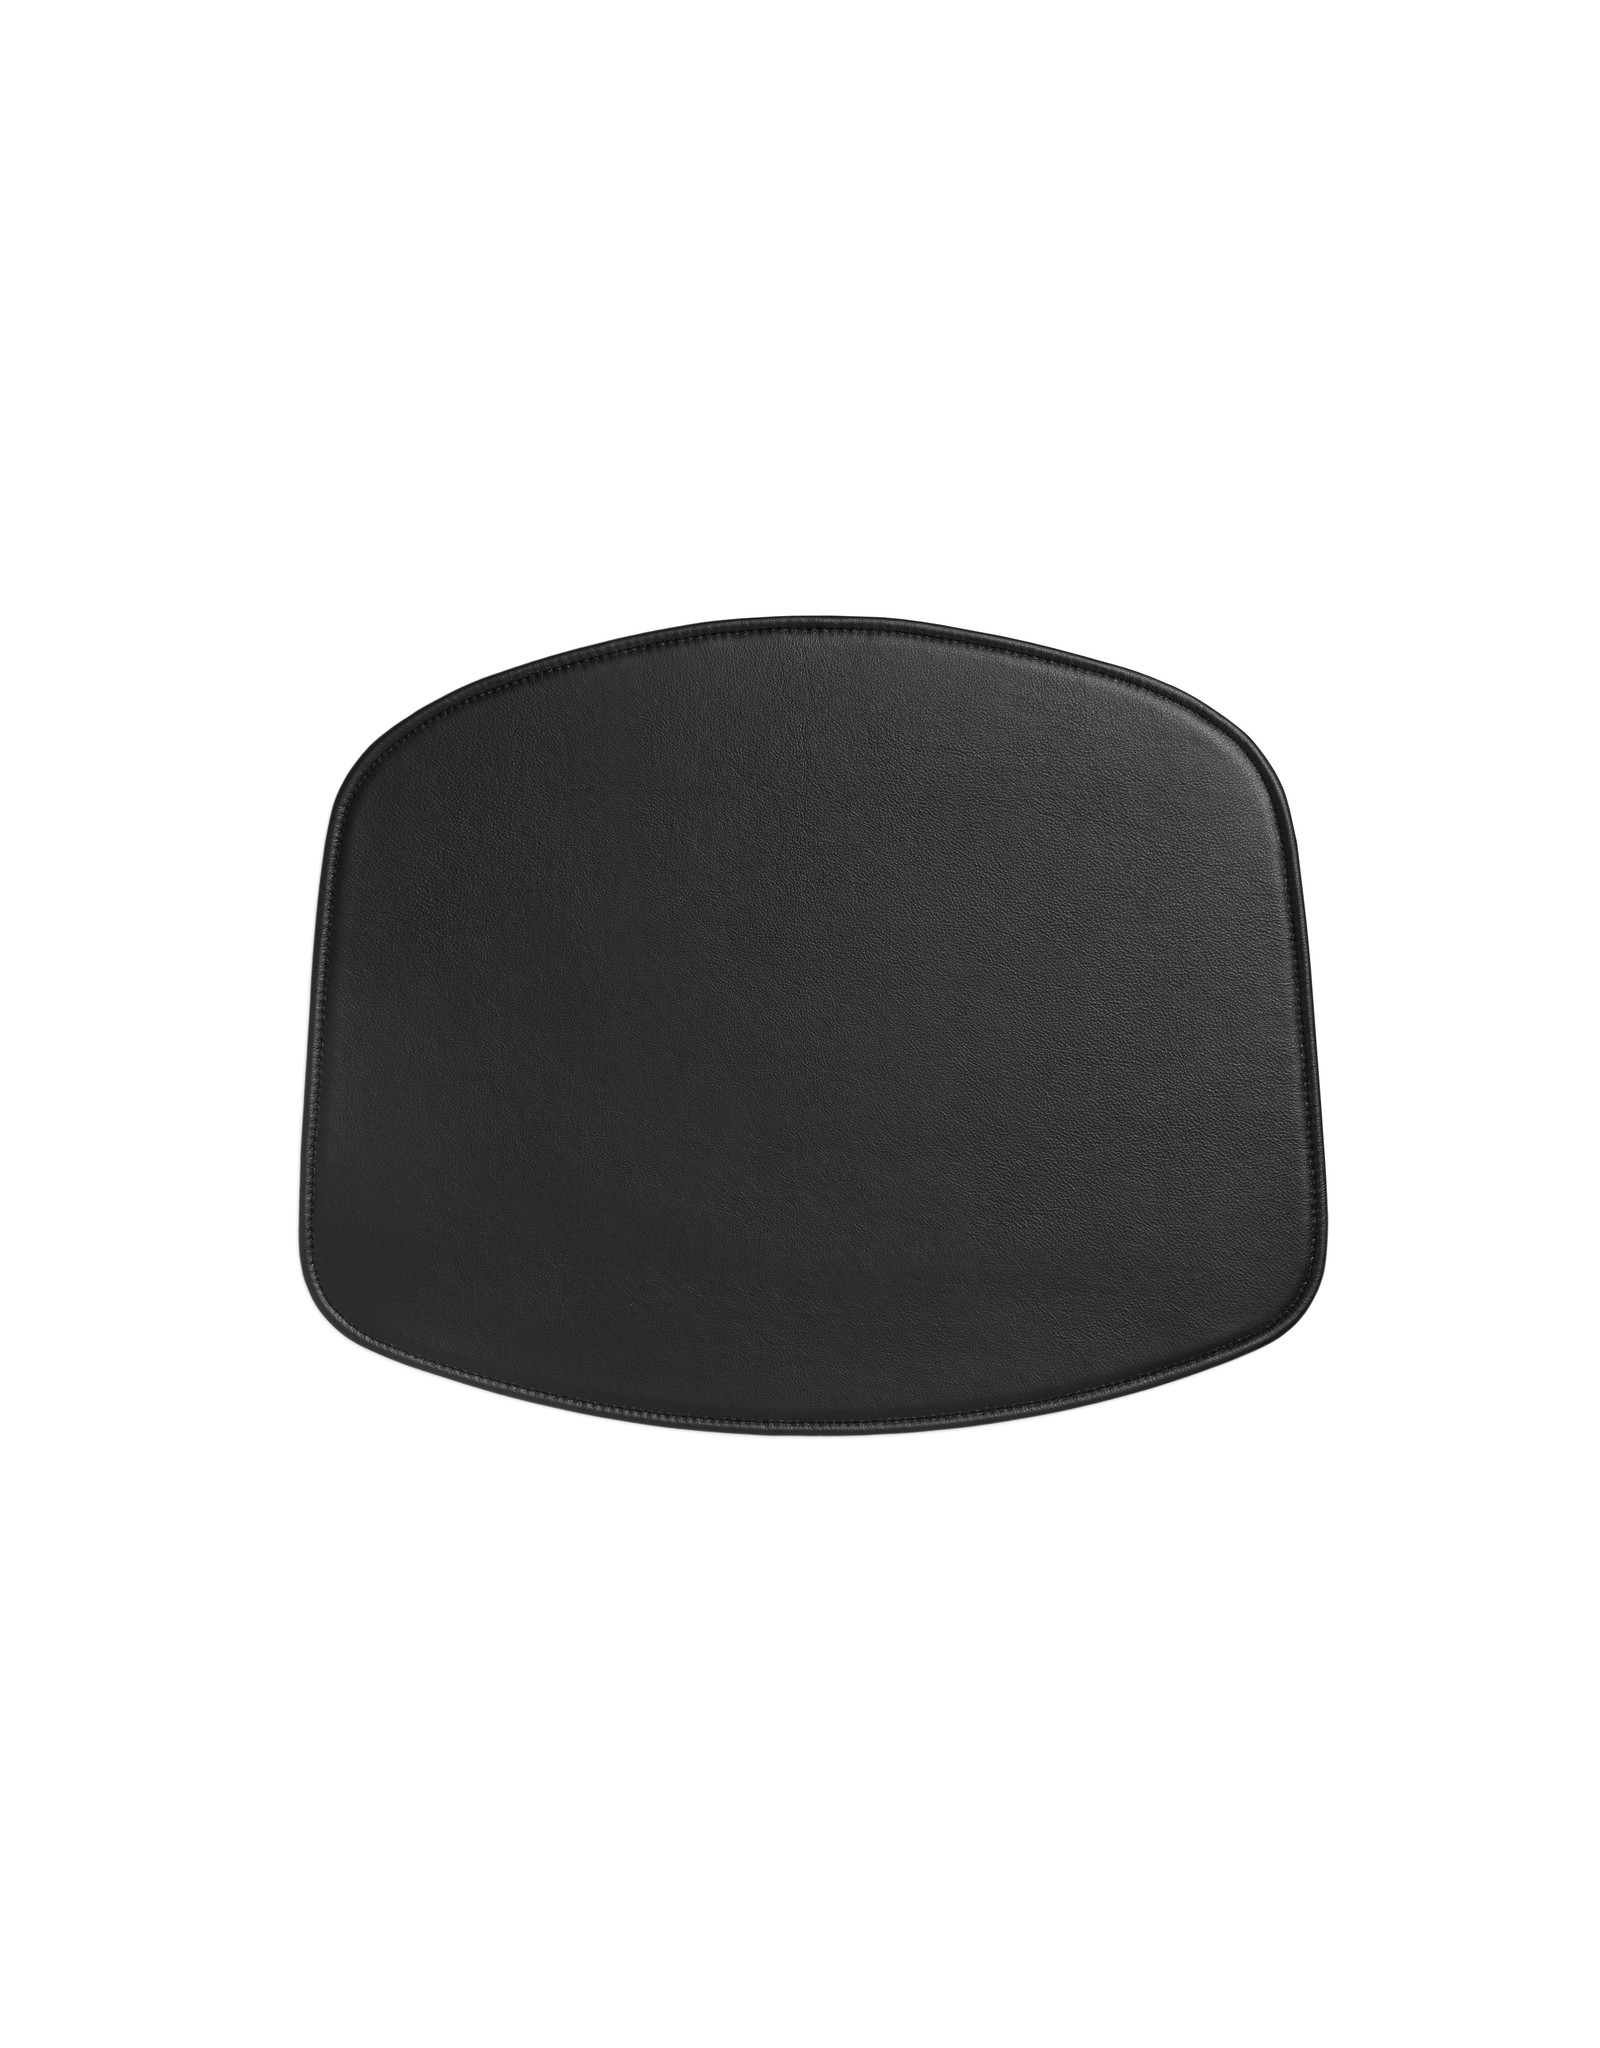 HAY AAC Seat Pad for Chair Without Arm - Leather Black - W48xD39xH0.5cm